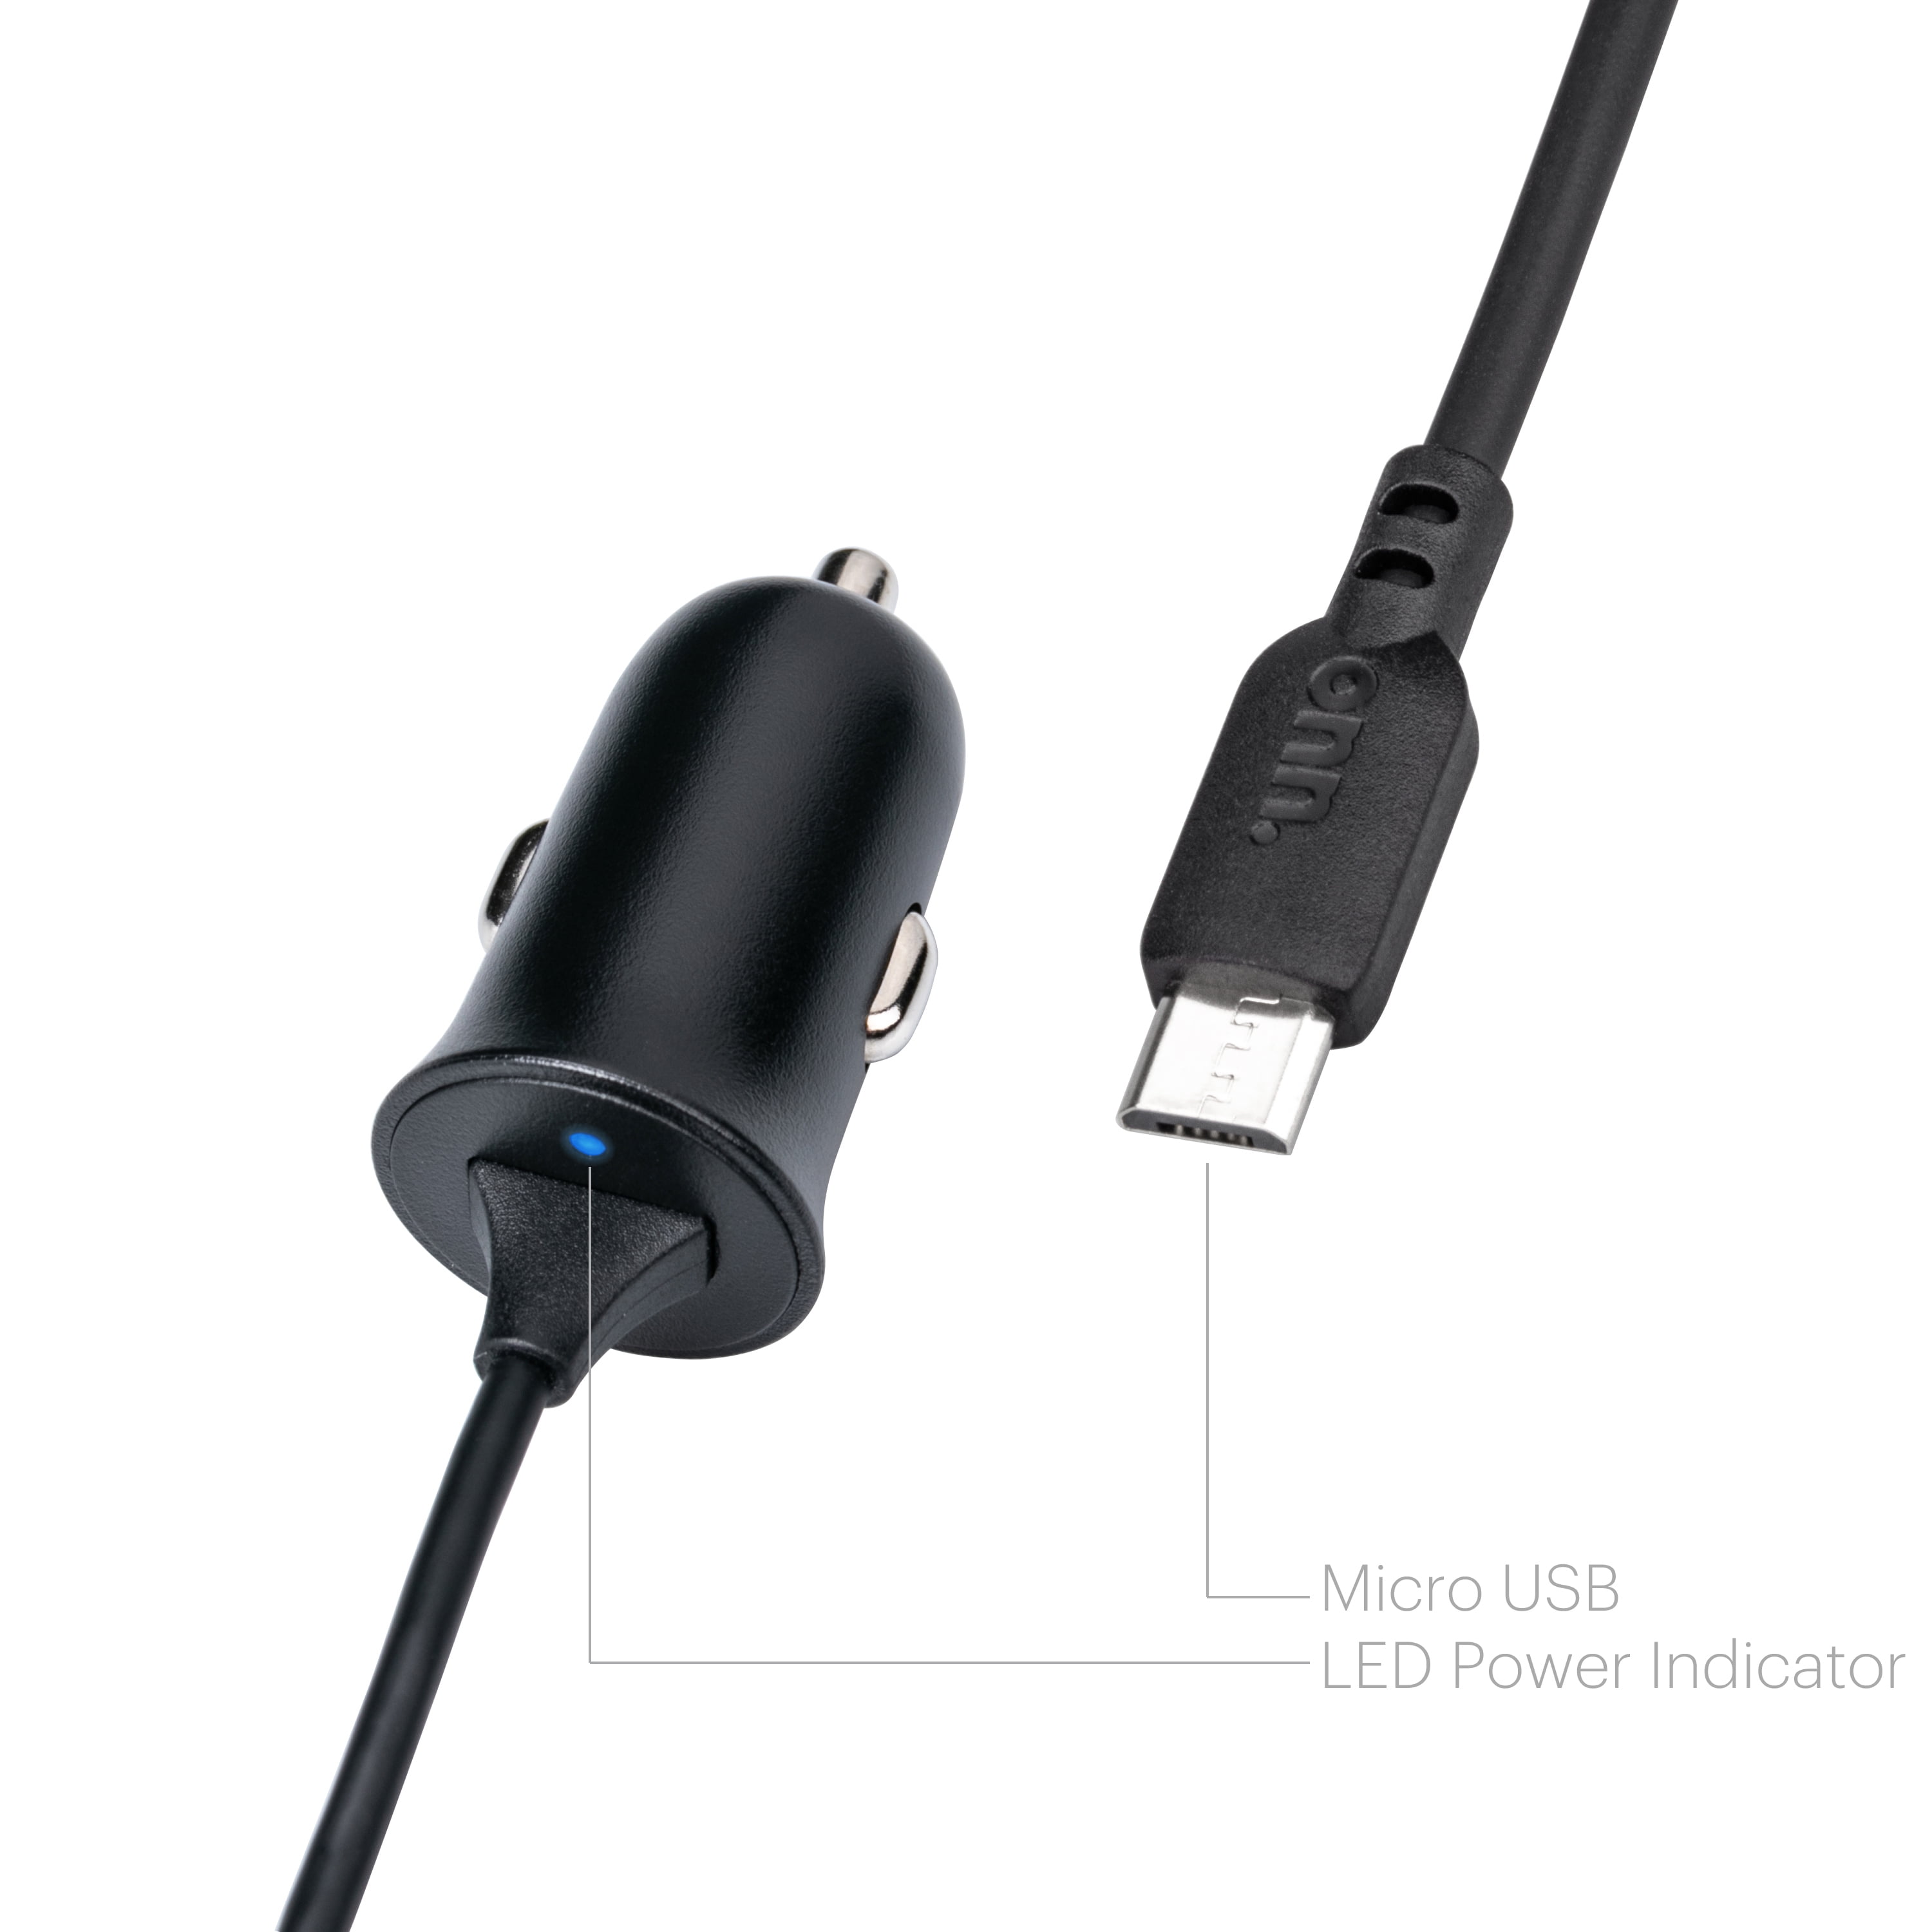 2.4A Car Charger Built-in Micro-USB Cable, Compatible with Devices with a USB Port - Walmart.com